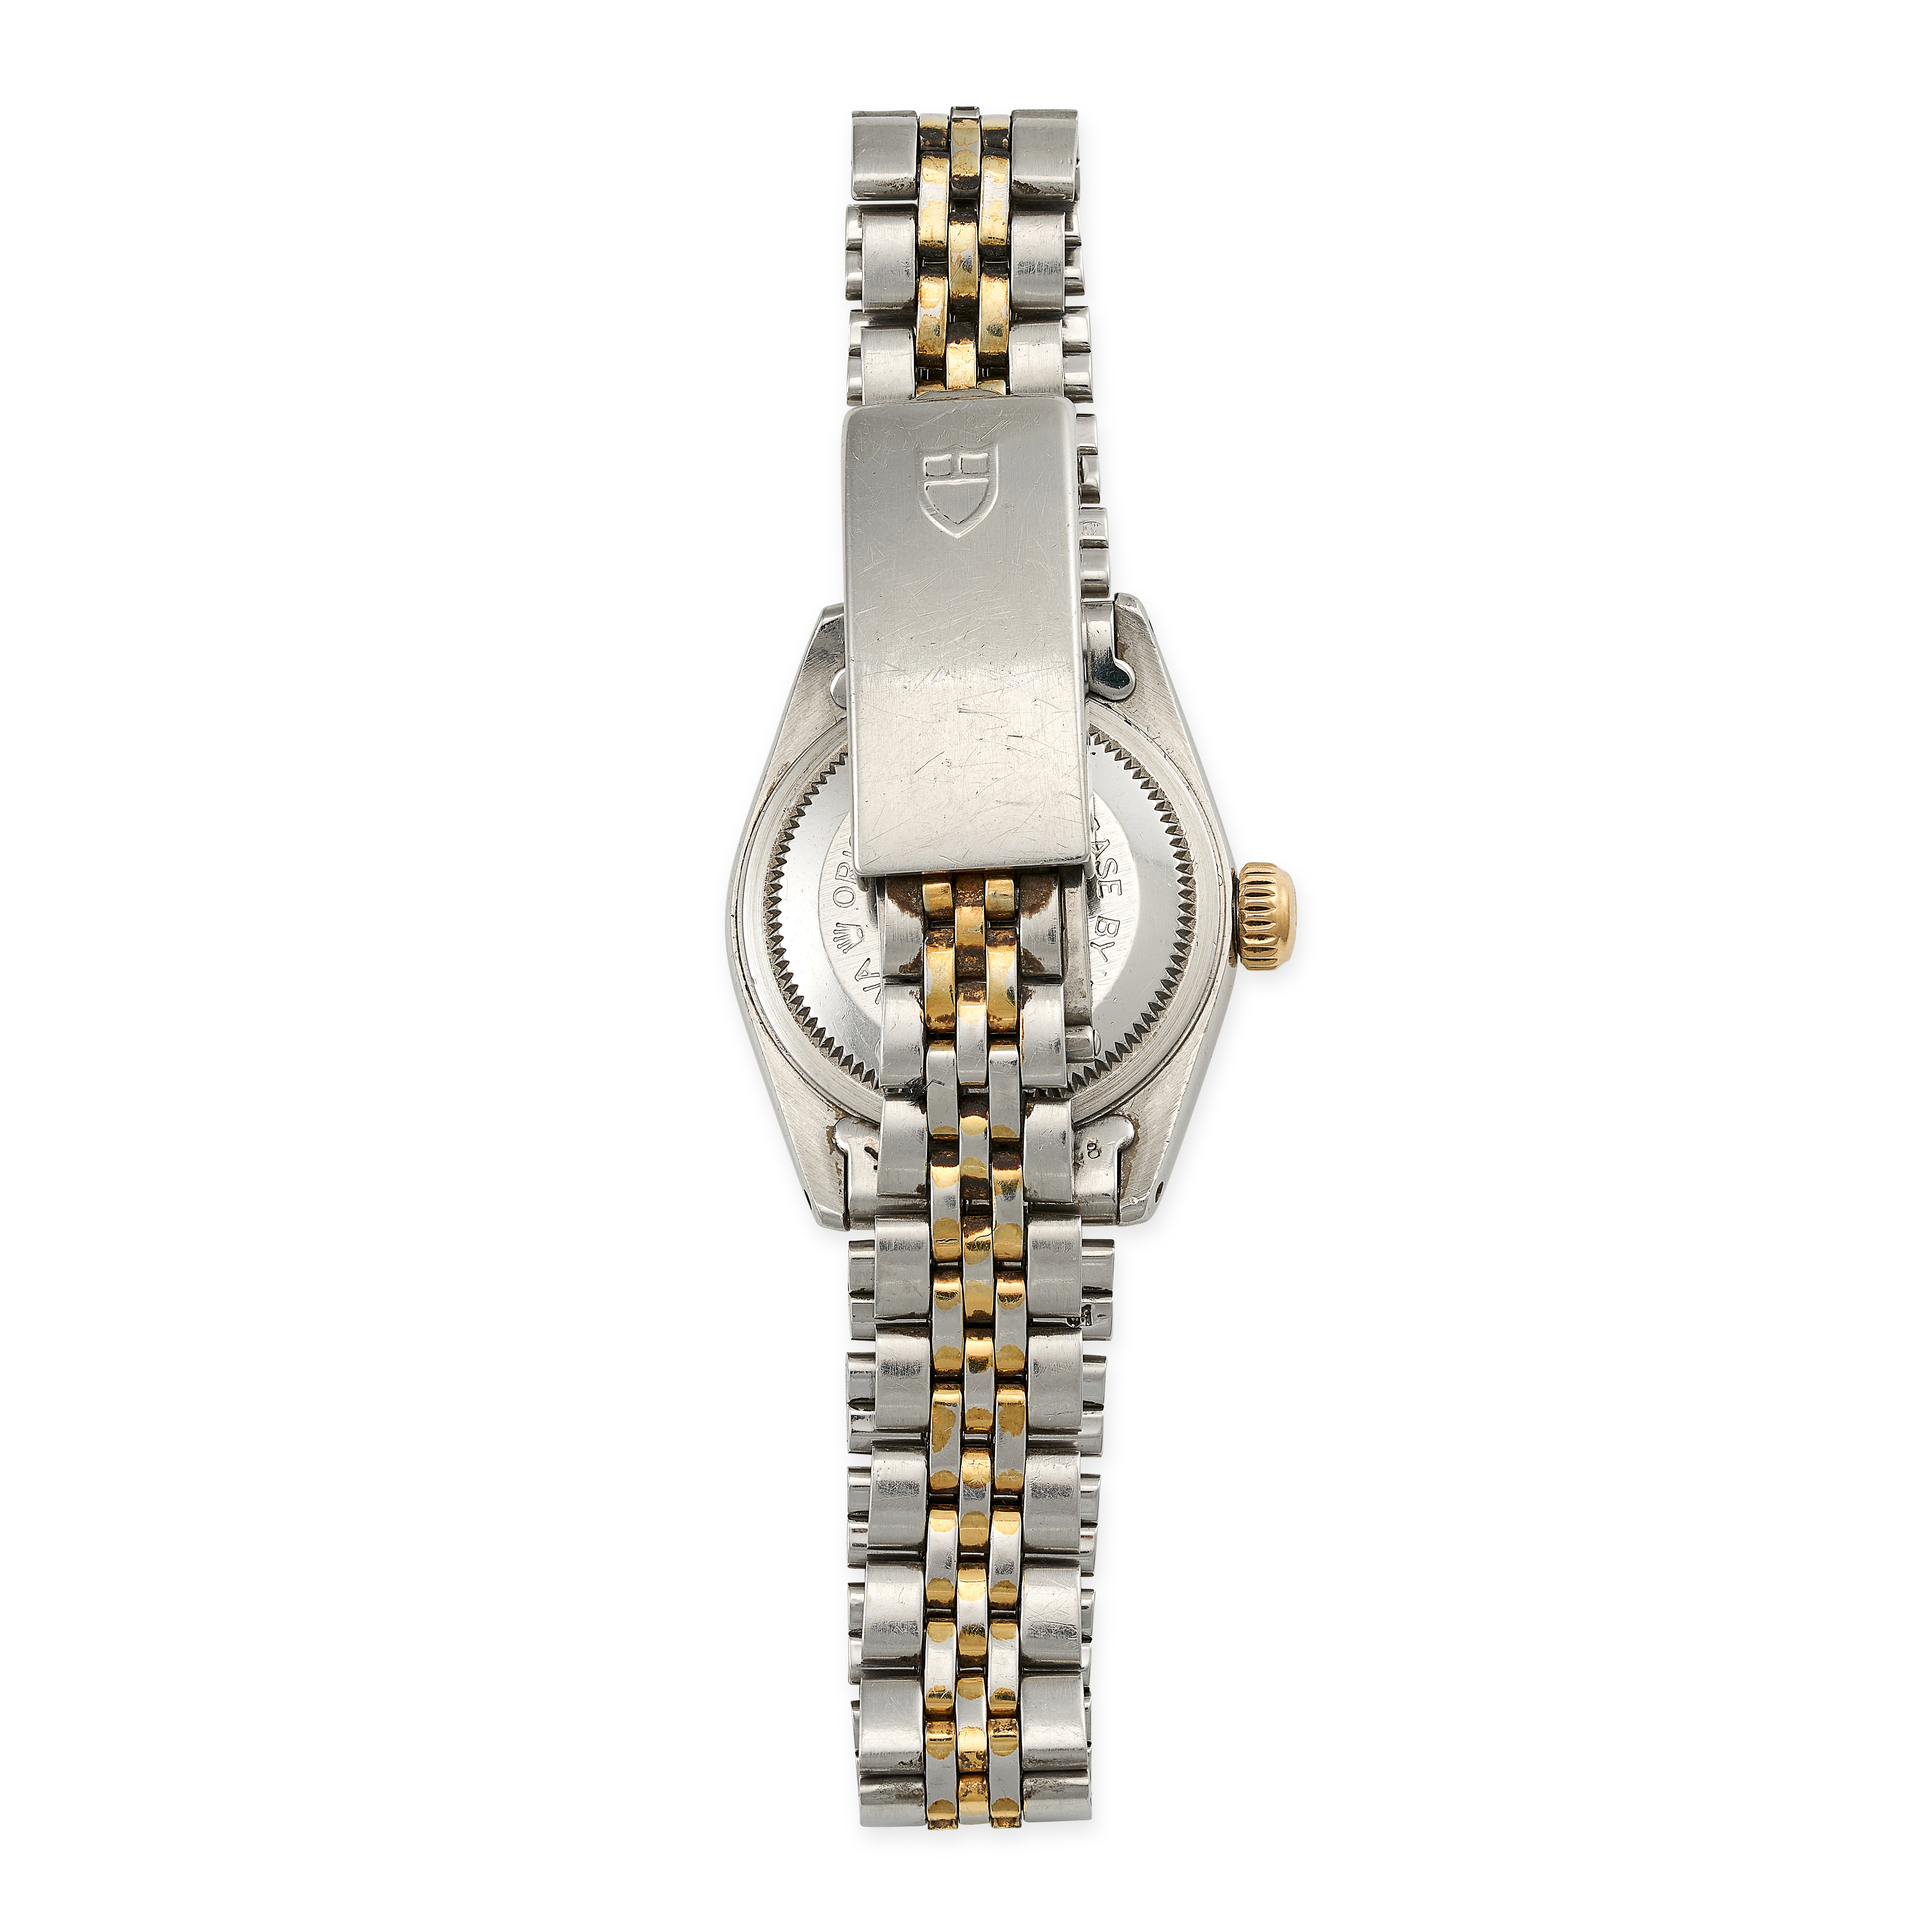 TUDOR, A VINTAGE LADIES PRINCE OYSTERDATE WRISTWATCH in stainless steel and yellow gold, white di... - Image 2 of 2